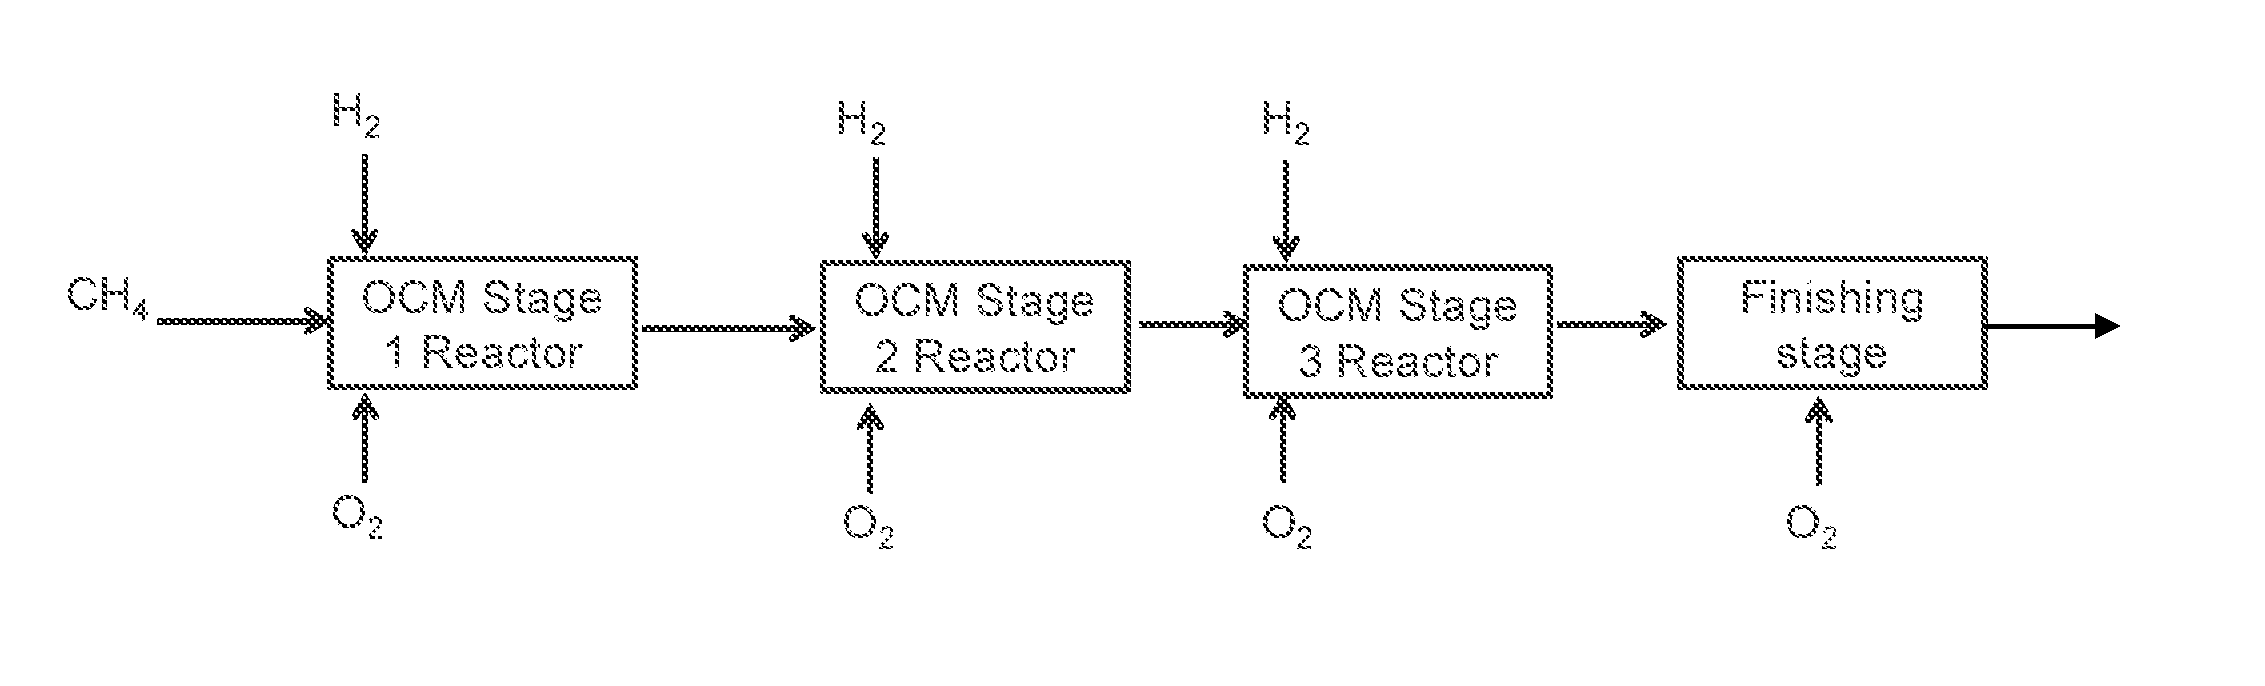 Method for Producing Hydrocarbons by Oxidative Coupling of Methane without Catalyst